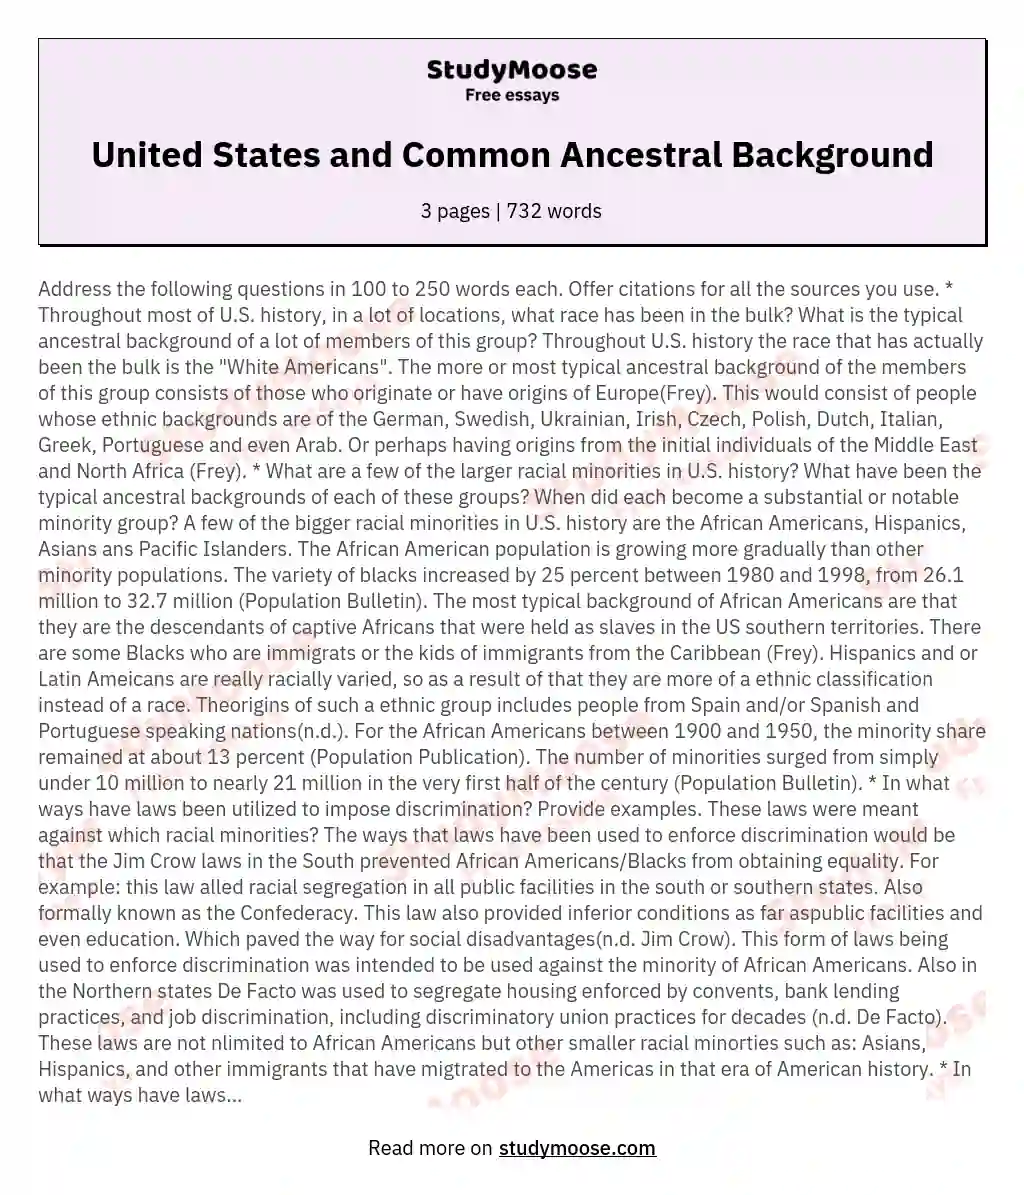 United States and Common Ancestral Background essay